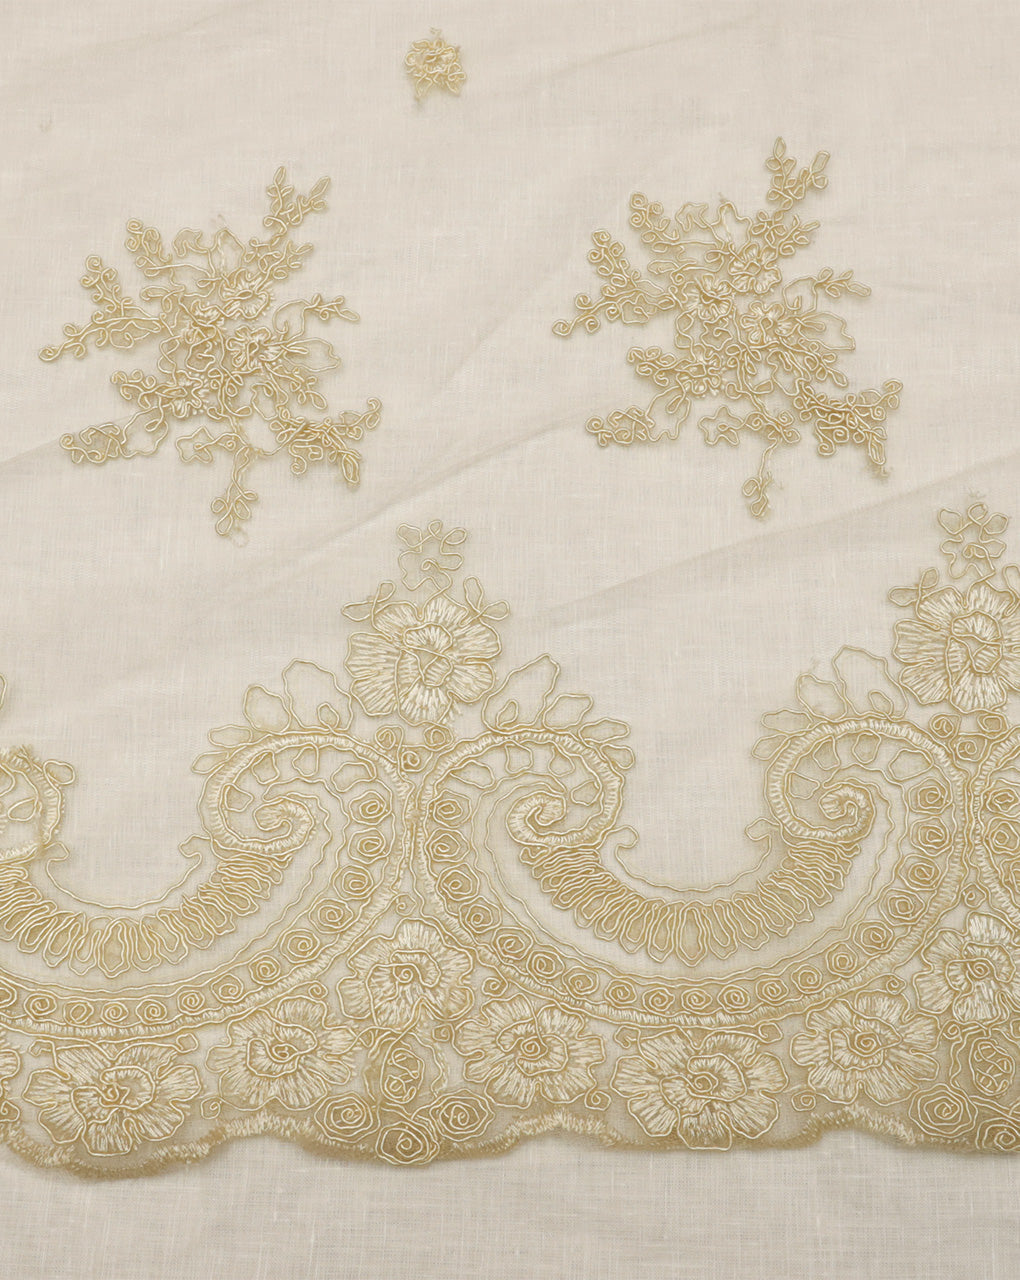 GOLDEN EMBROIDERY POLYESTER NET DESIGNER FABRIC (WIDTH 50 INCHES)